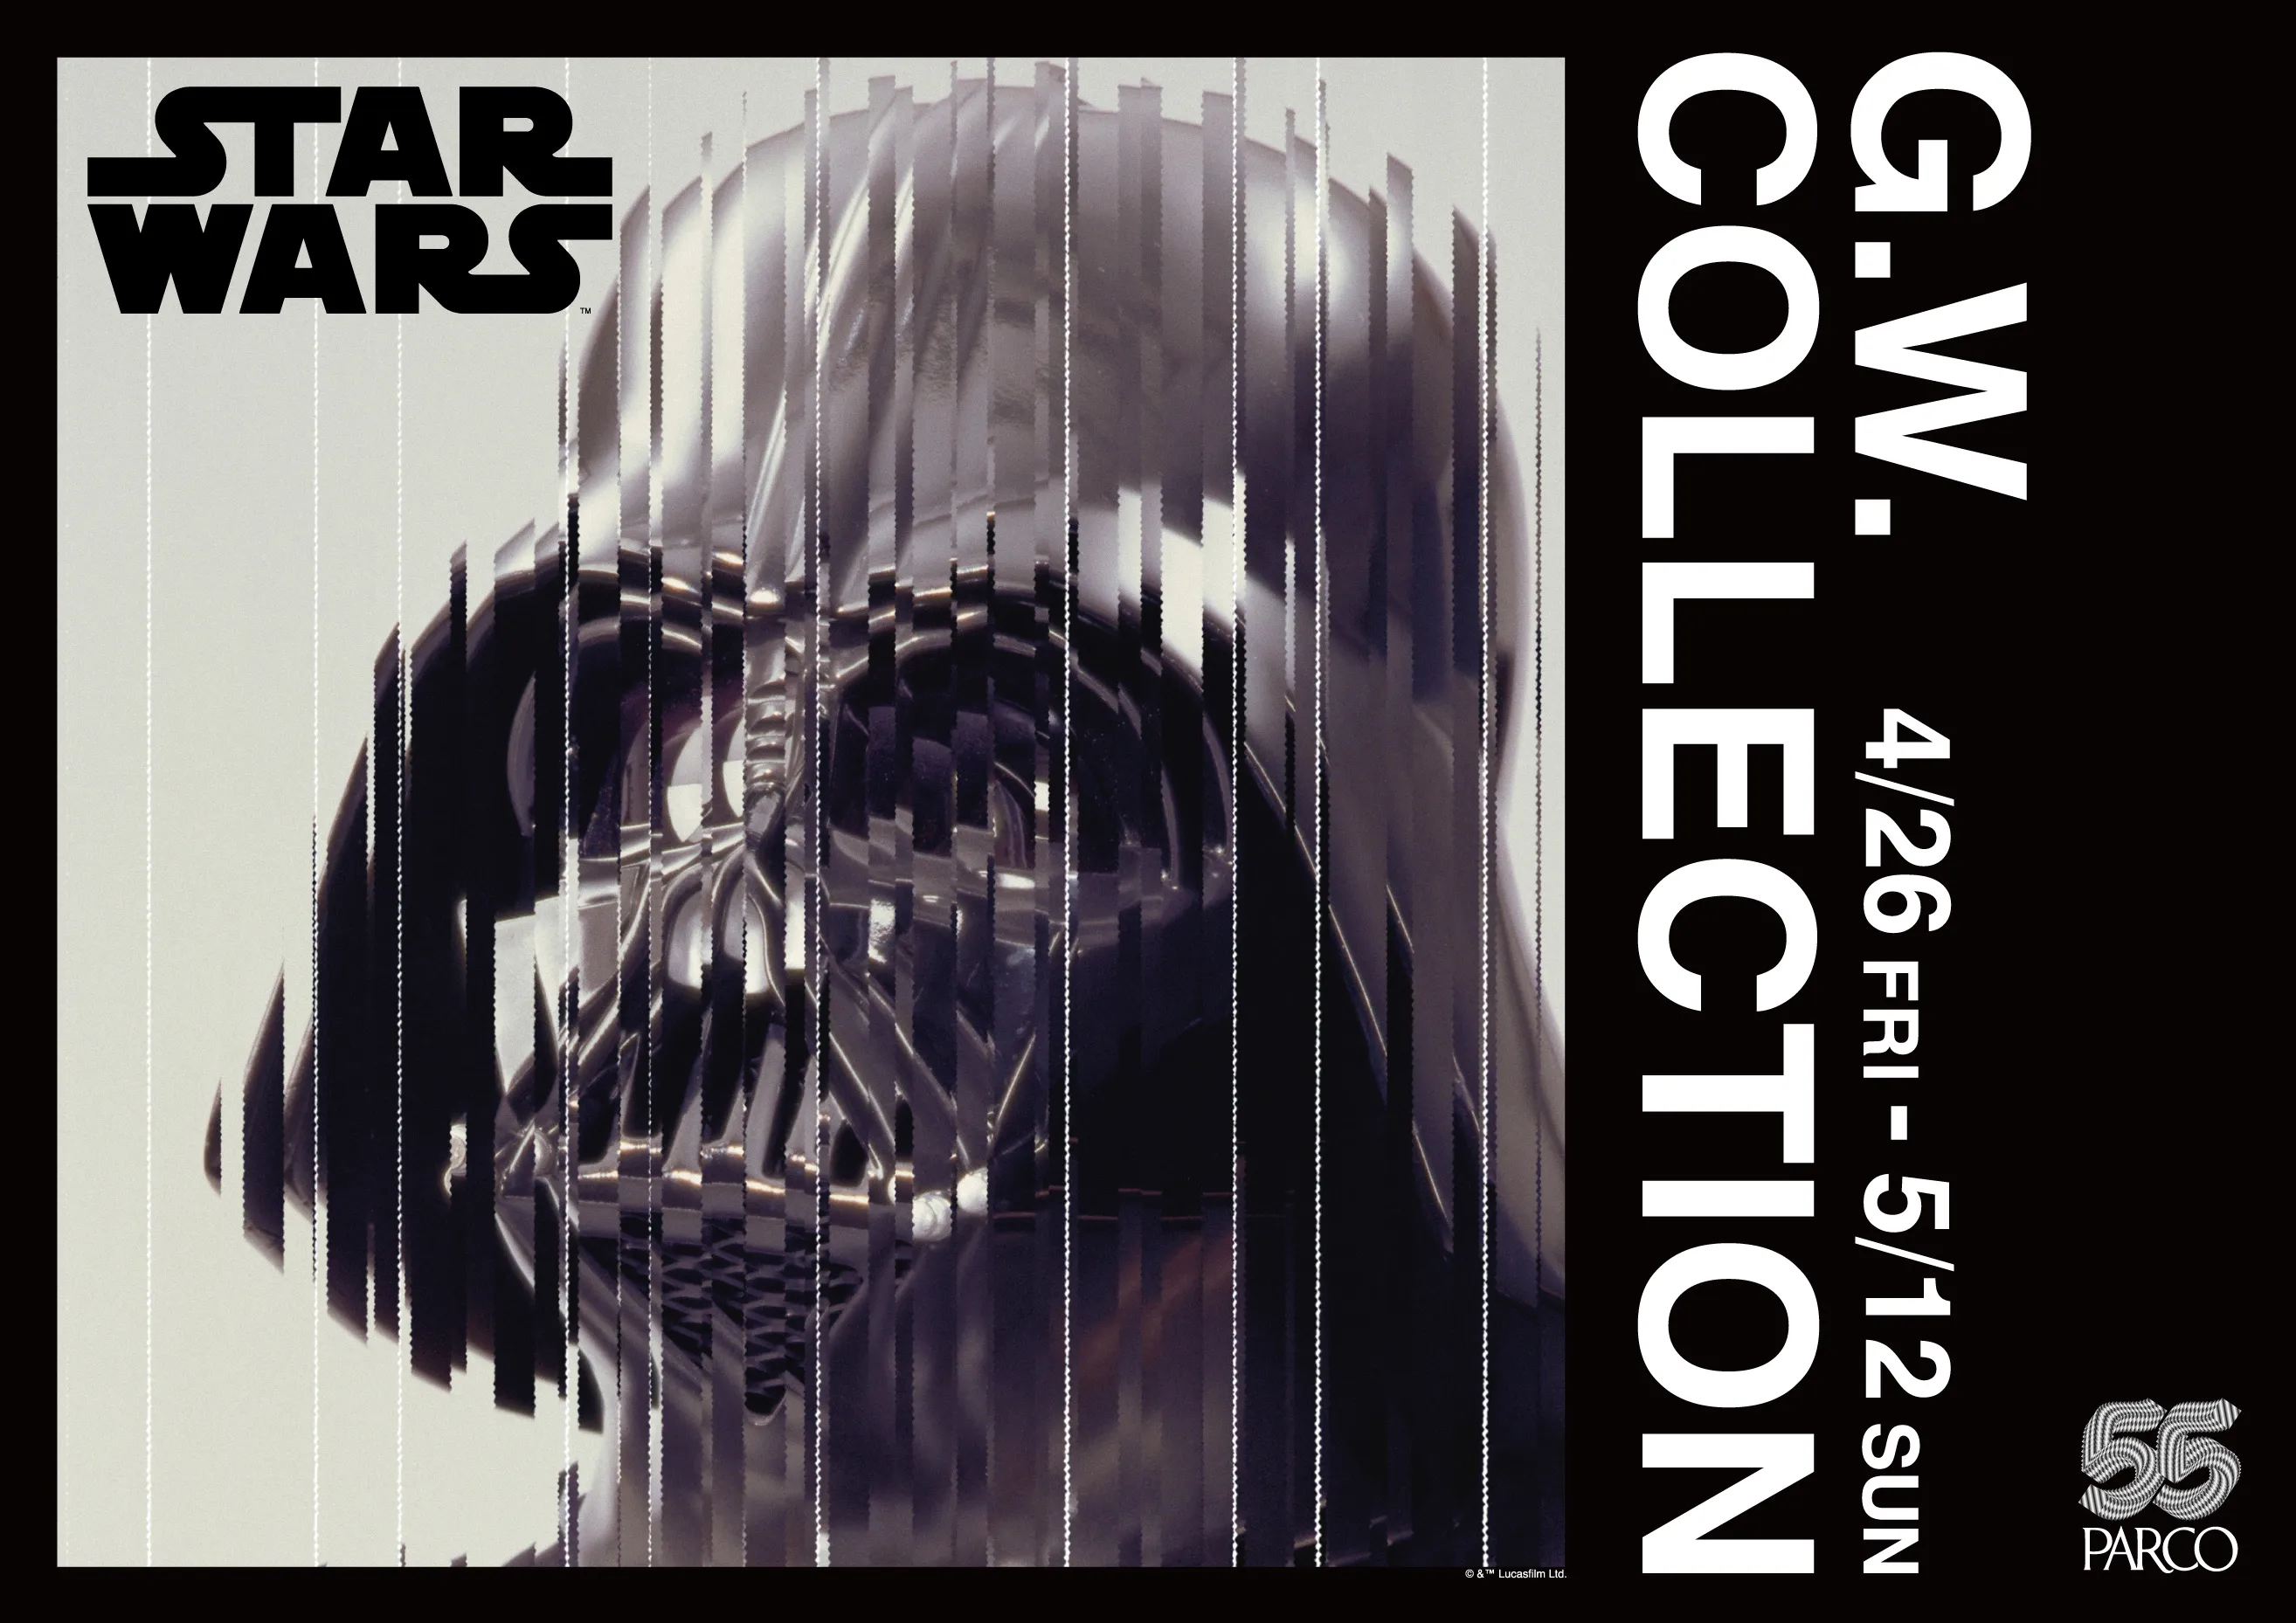 STAR WARS G.W. COLLECTION PARCO 55th CAMPAIGN | EVENT